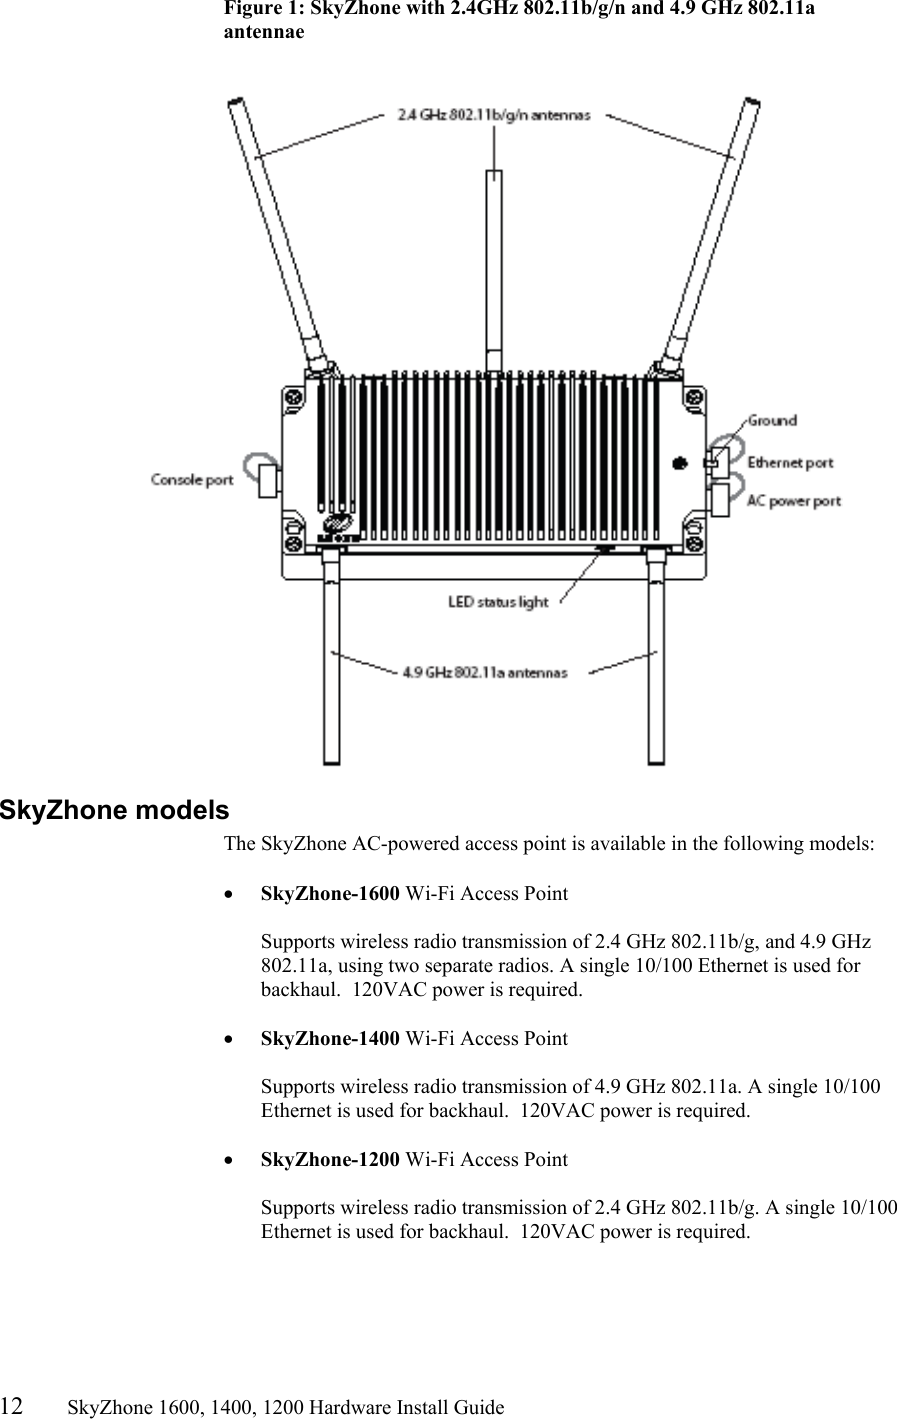 12       SkyZhone 1600, 1400, 1200 Hardware Install Guide          Figure 1: SkyZhone with 2.4GHz 802.11b/g/n and 4.9 GHz 802.11a antennae    SkyZhone models The SkyZhone AC-powered access point is available in the following models:  •  SkyZhone-1600 Wi-Fi Access Point  Supports wireless radio transmission of 2.4 GHz 802.11b/g, and 4.9 GHz 802.11a, using two separate radios. A single 10/100 Ethernet is used for backhaul.  120VAC power is required.  •  SkyZhone-1400 Wi-Fi Access Point  Supports wireless radio transmission of 4.9 GHz 802.11a. A single 10/100 Ethernet is used for backhaul.  120VAC power is required.  •  SkyZhone-1200 Wi-Fi Access Point  Supports wireless radio transmission of 2.4 GHz 802.11b/g. A single 10/100 Ethernet is used for backhaul.  120VAC power is required. 